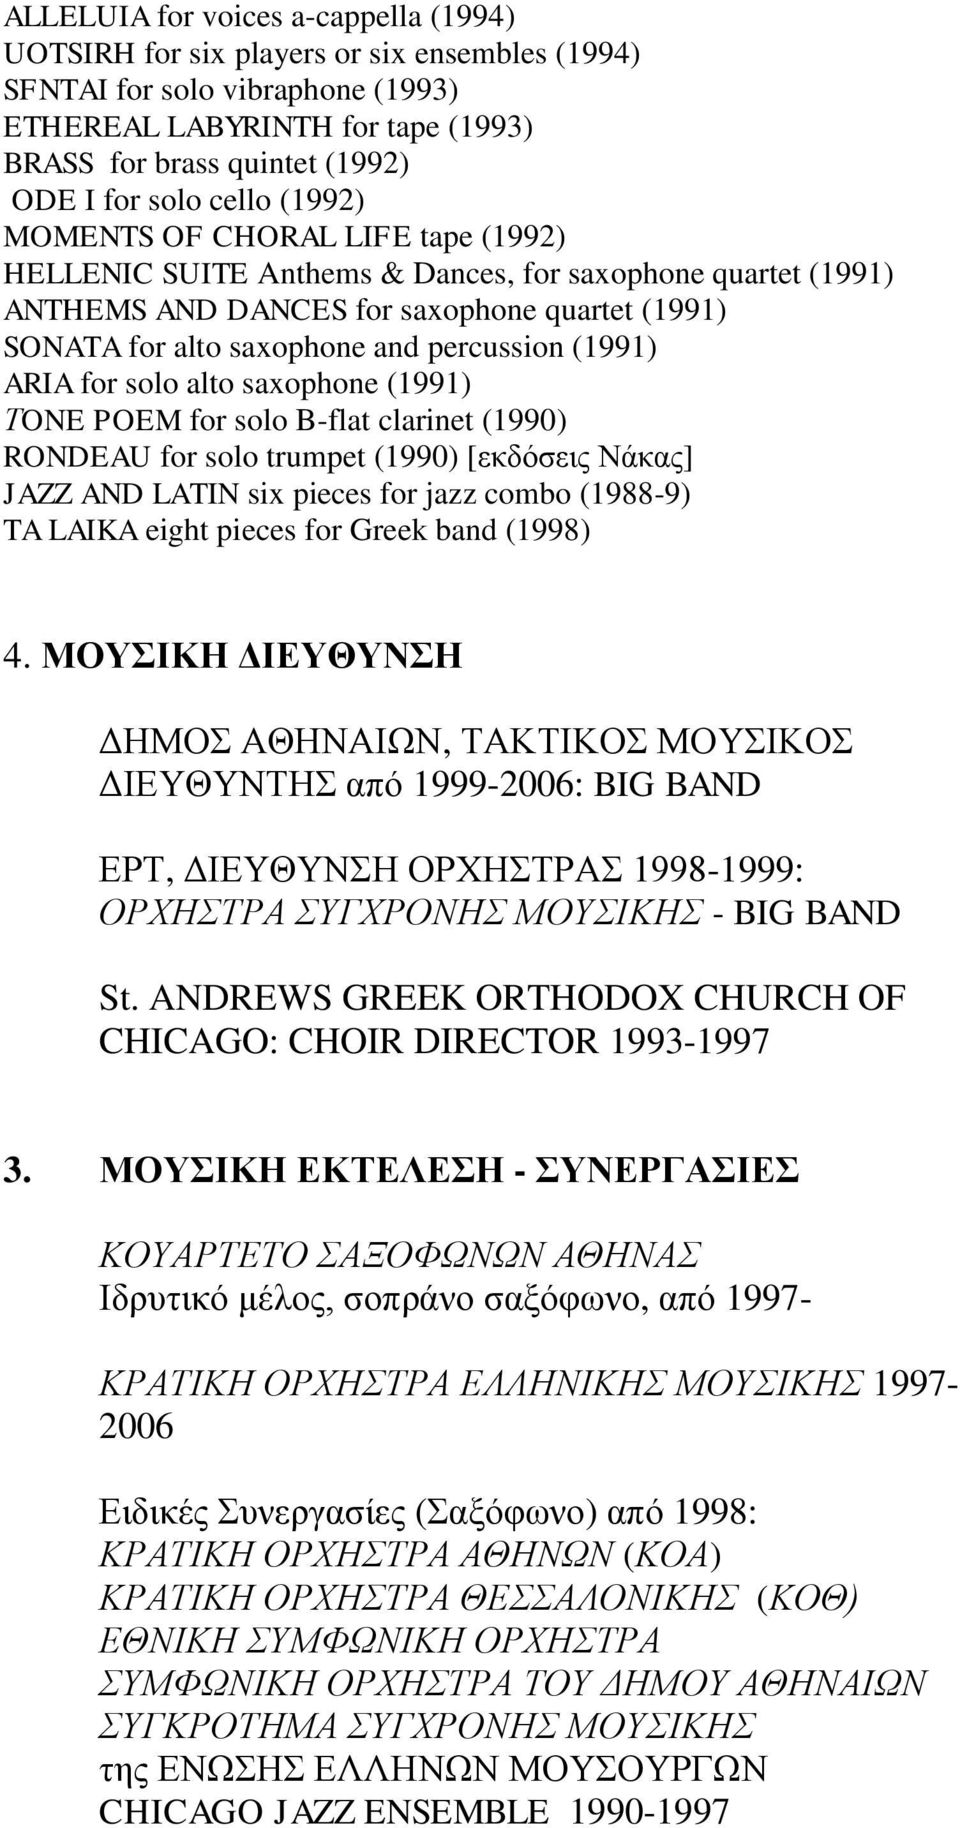 percussion (1991) ARIA for solo alto saxophone (1991) ΤONE POEM for solo B-flat clarinet (1990) RONDEAU for solo trumpet (1990) [εκδόσεις Νάκας] JAZZ AND LATIN six pieces for jazz combo (1988-9) TA